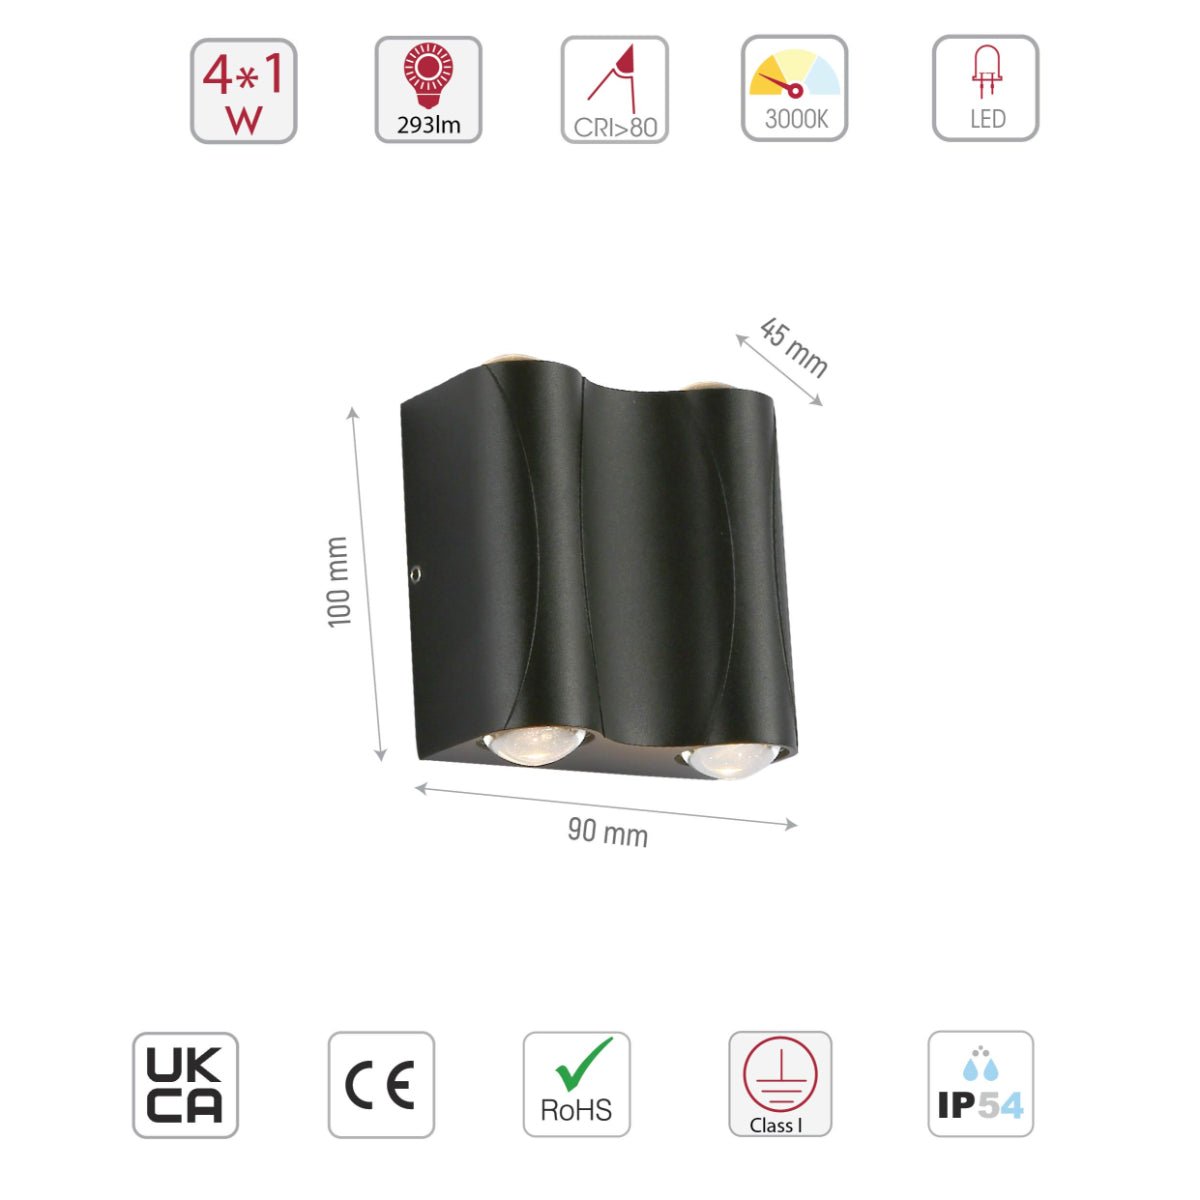 Size and specs of Black Corrugated Up Down Outdoor Modern LED Wall Light | TEKLED 183-03326